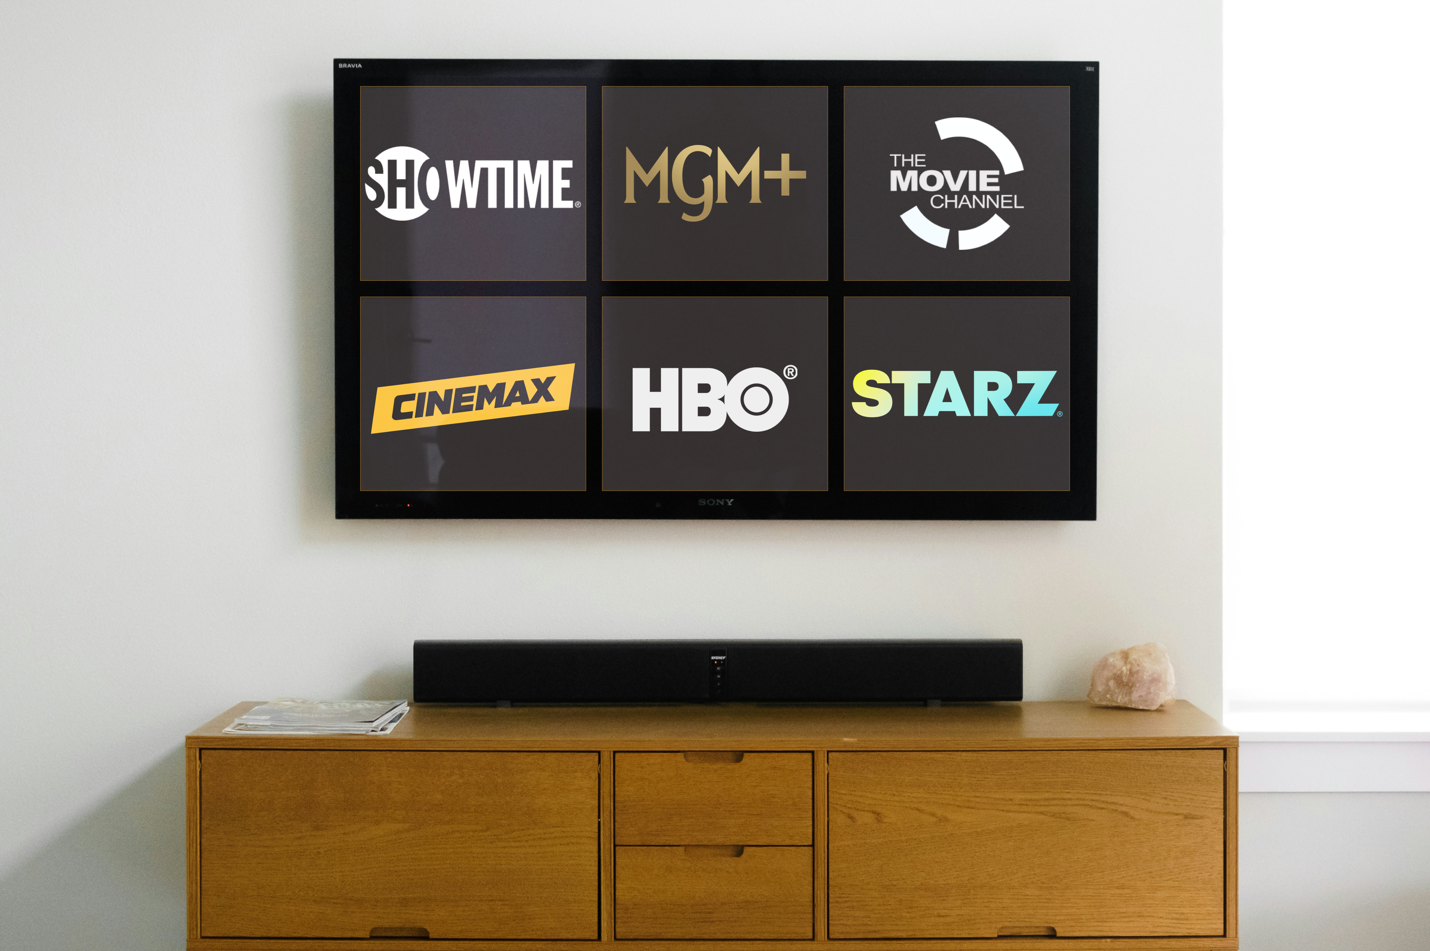 TV displaying a premium channel package, including logos from Showtime, MGM+, The Movie Channel, Cinemax, HBO, and Starz